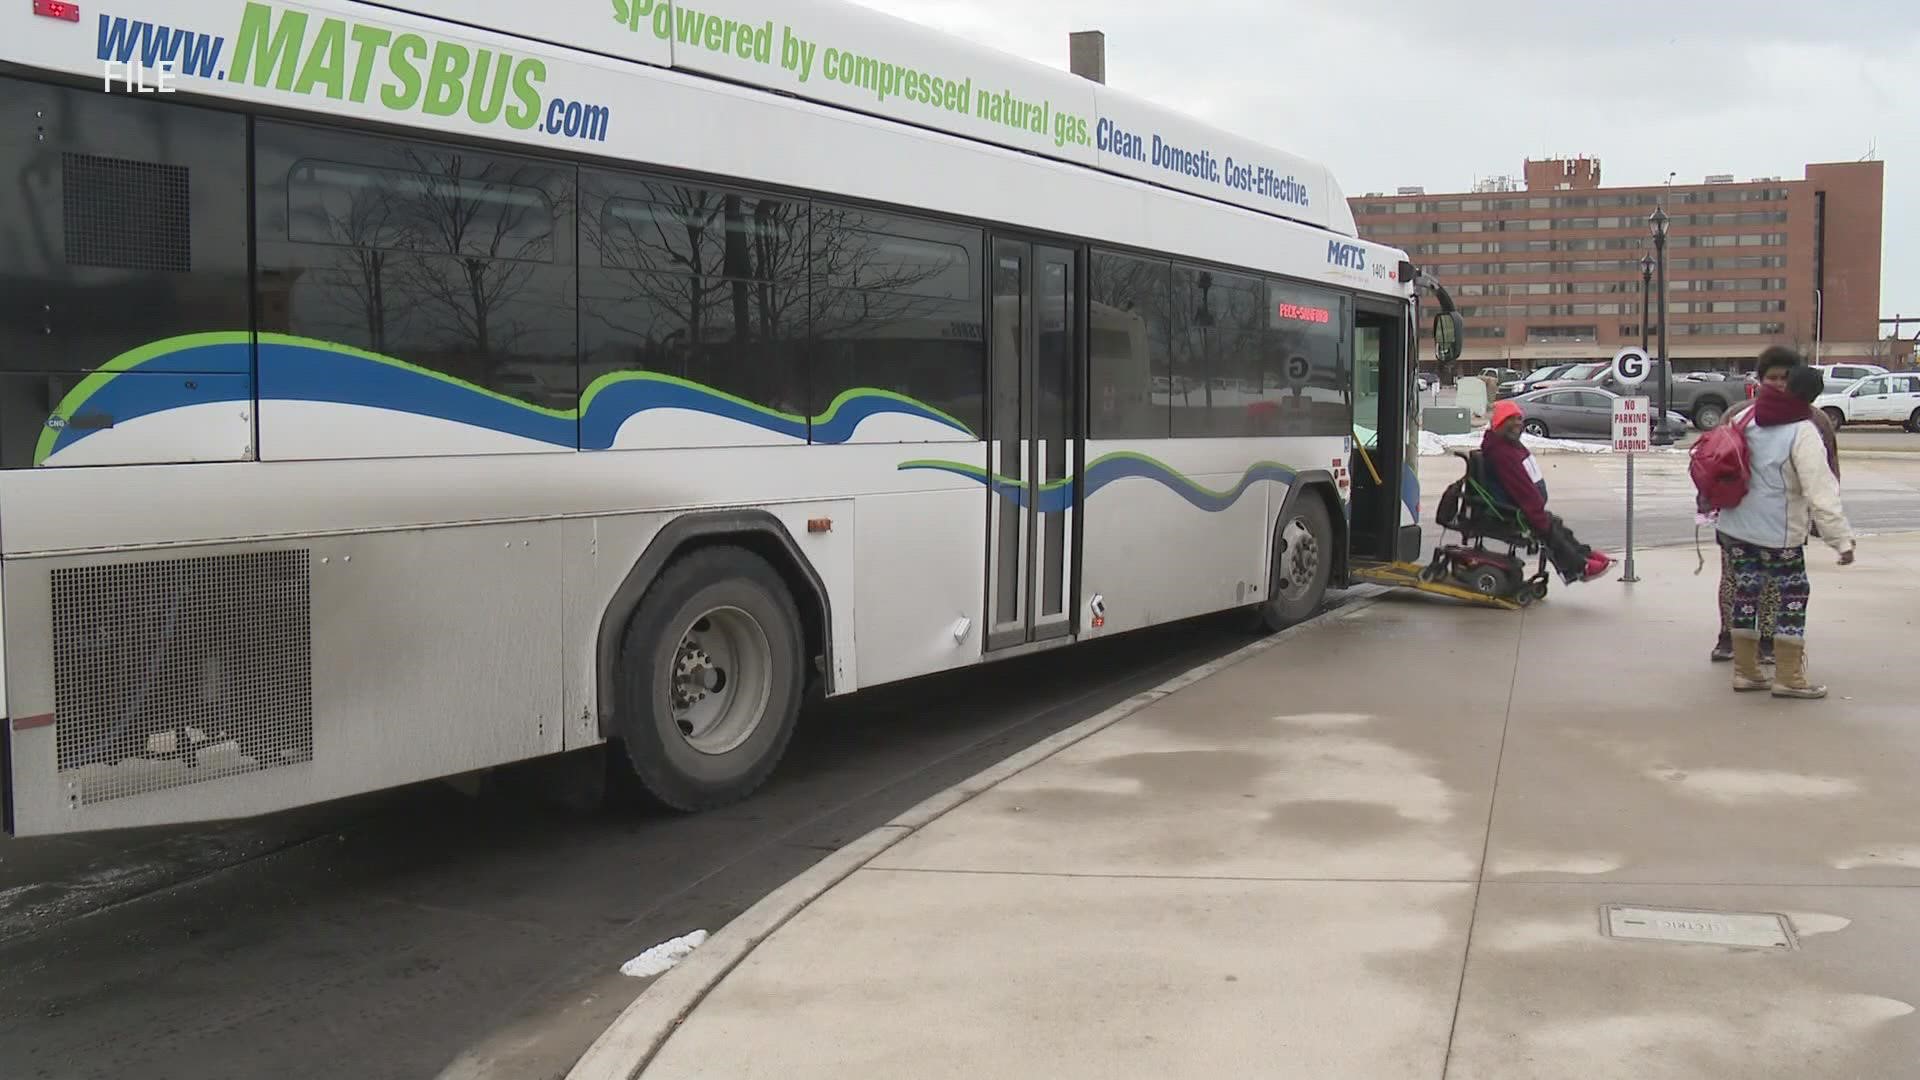 The two public transportation systems now share a stop in Norton Shores where customers can transfer.